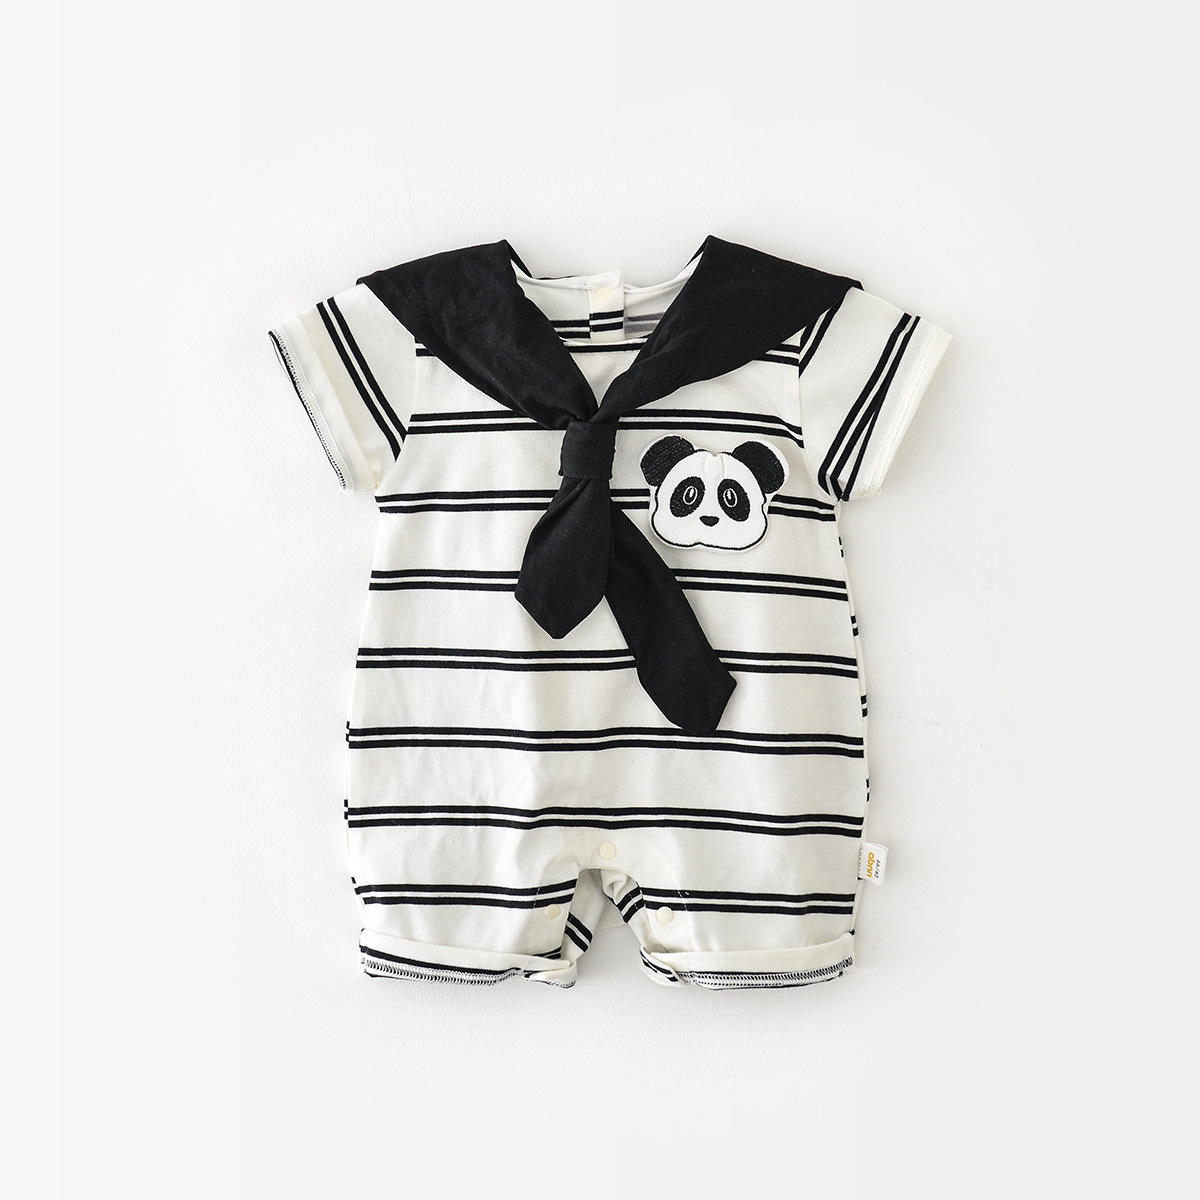 Sustainable Fashion for Little Trendsetters kids clothing babys clothing Finely Stitched for Lasting Durability